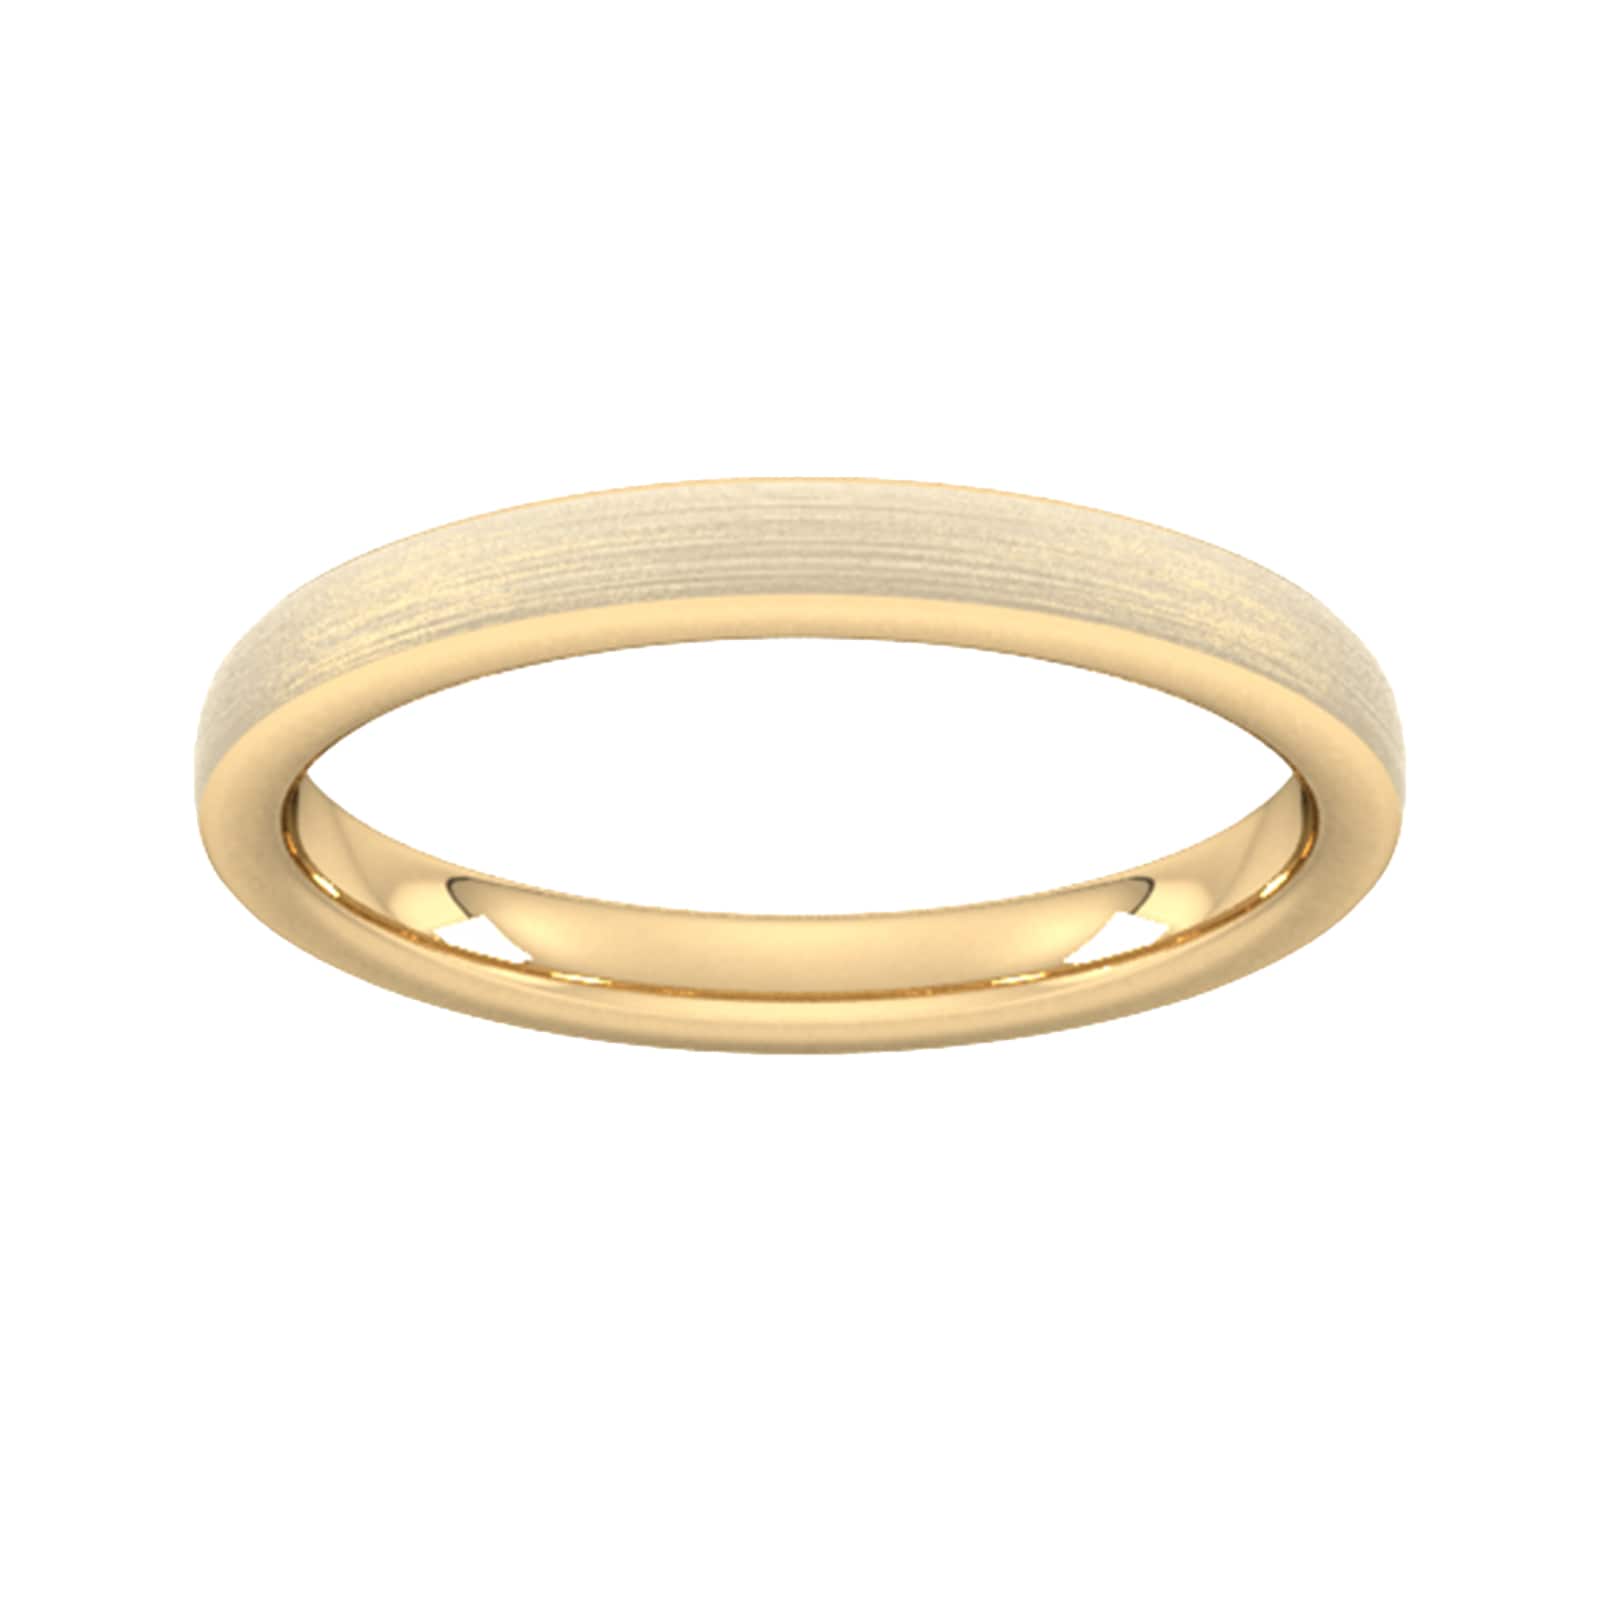 2.5mm Slight Court Standard Polished Chamfered Edges With Matt Centre Wedding Ring In 9 Carat Yellow Gold - Ring Size R